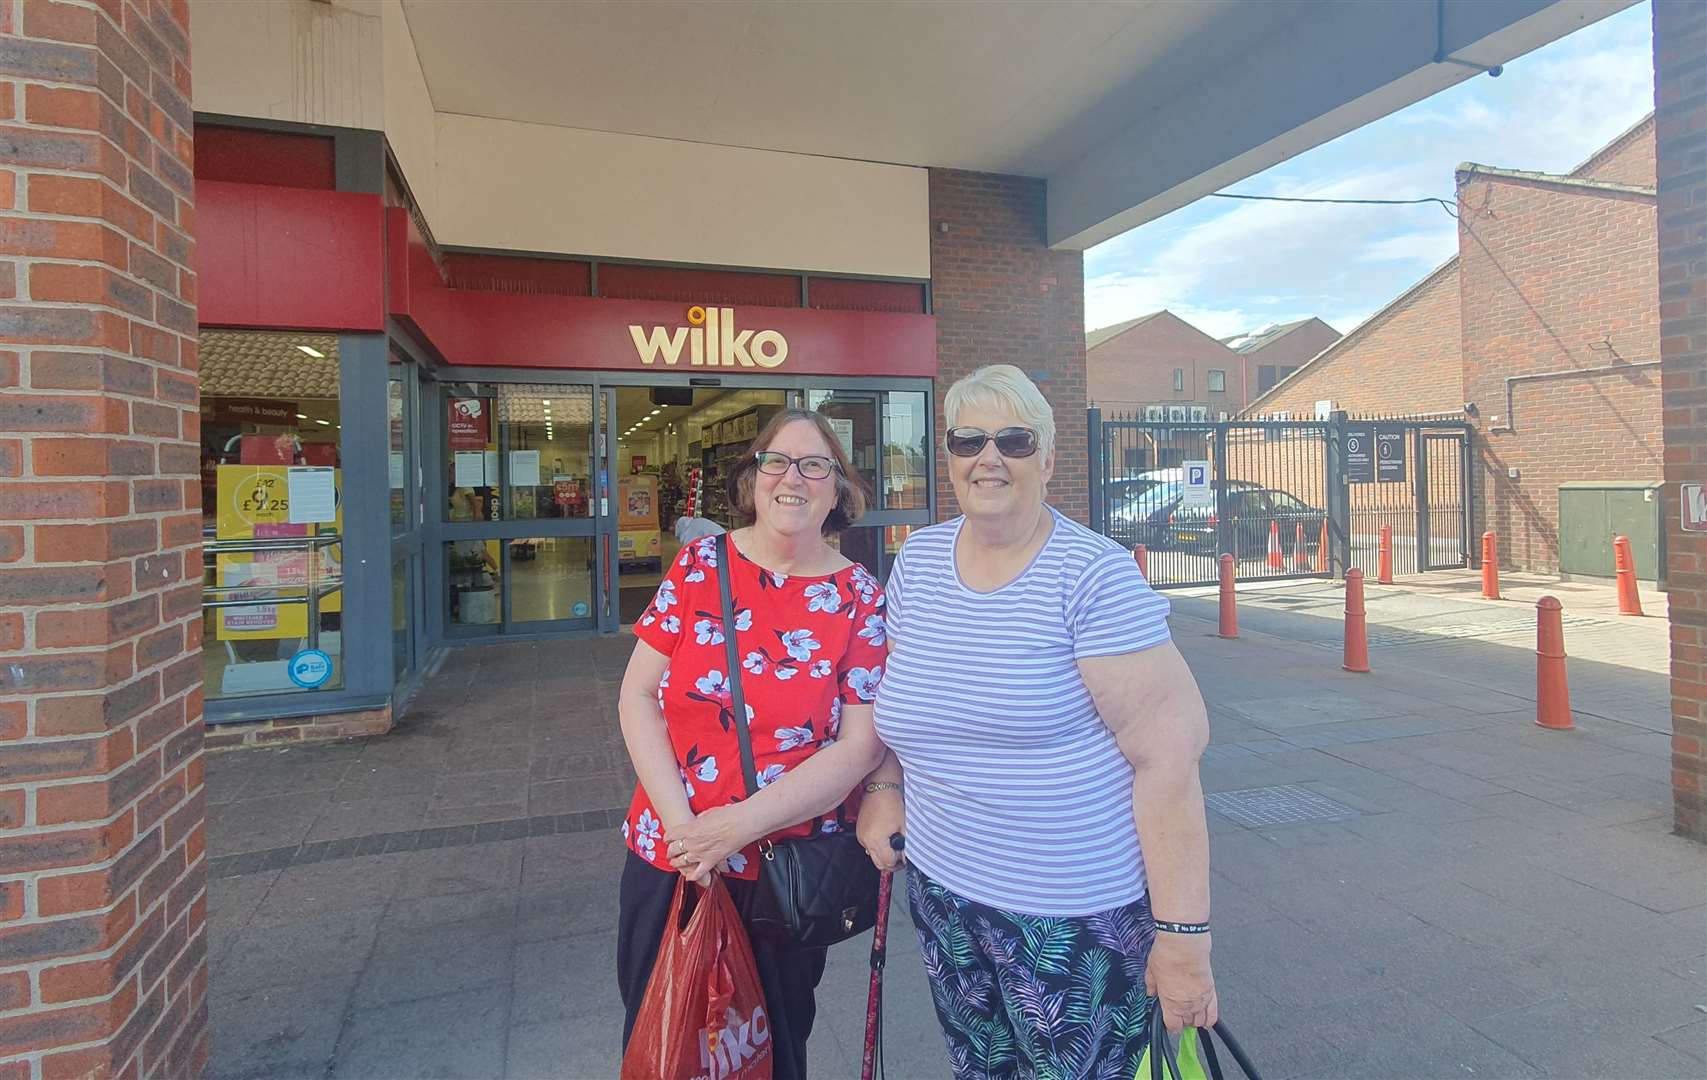 Friends Pearl and Flo say Rainham Shopping Centre will lose its social aspect without Wilko, which will impact the mental health of older residents